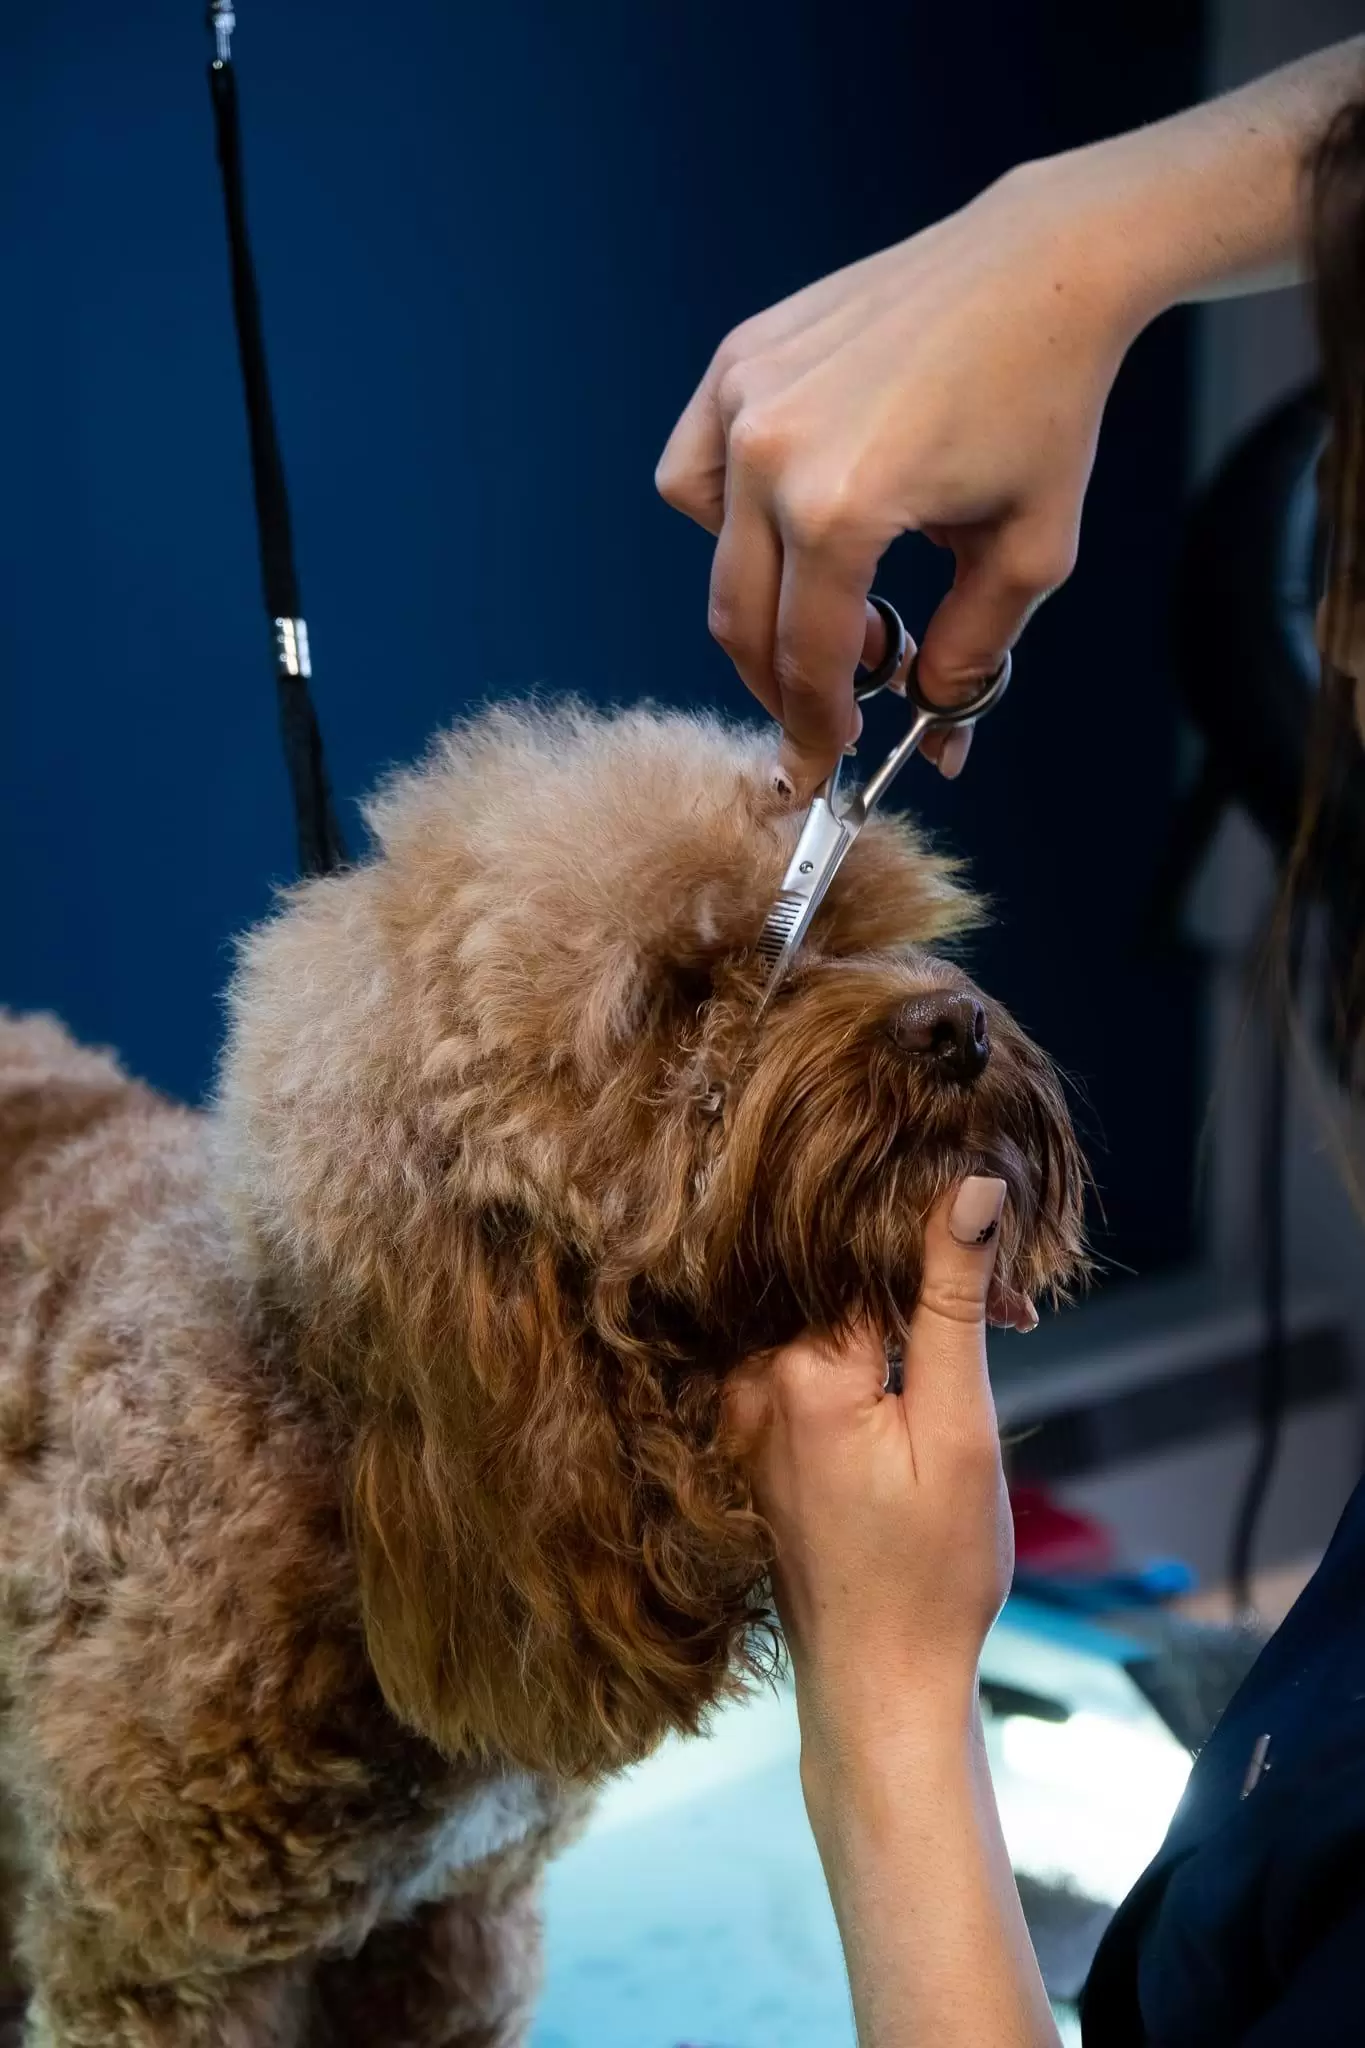 Cute dog getting snout hair trimmed